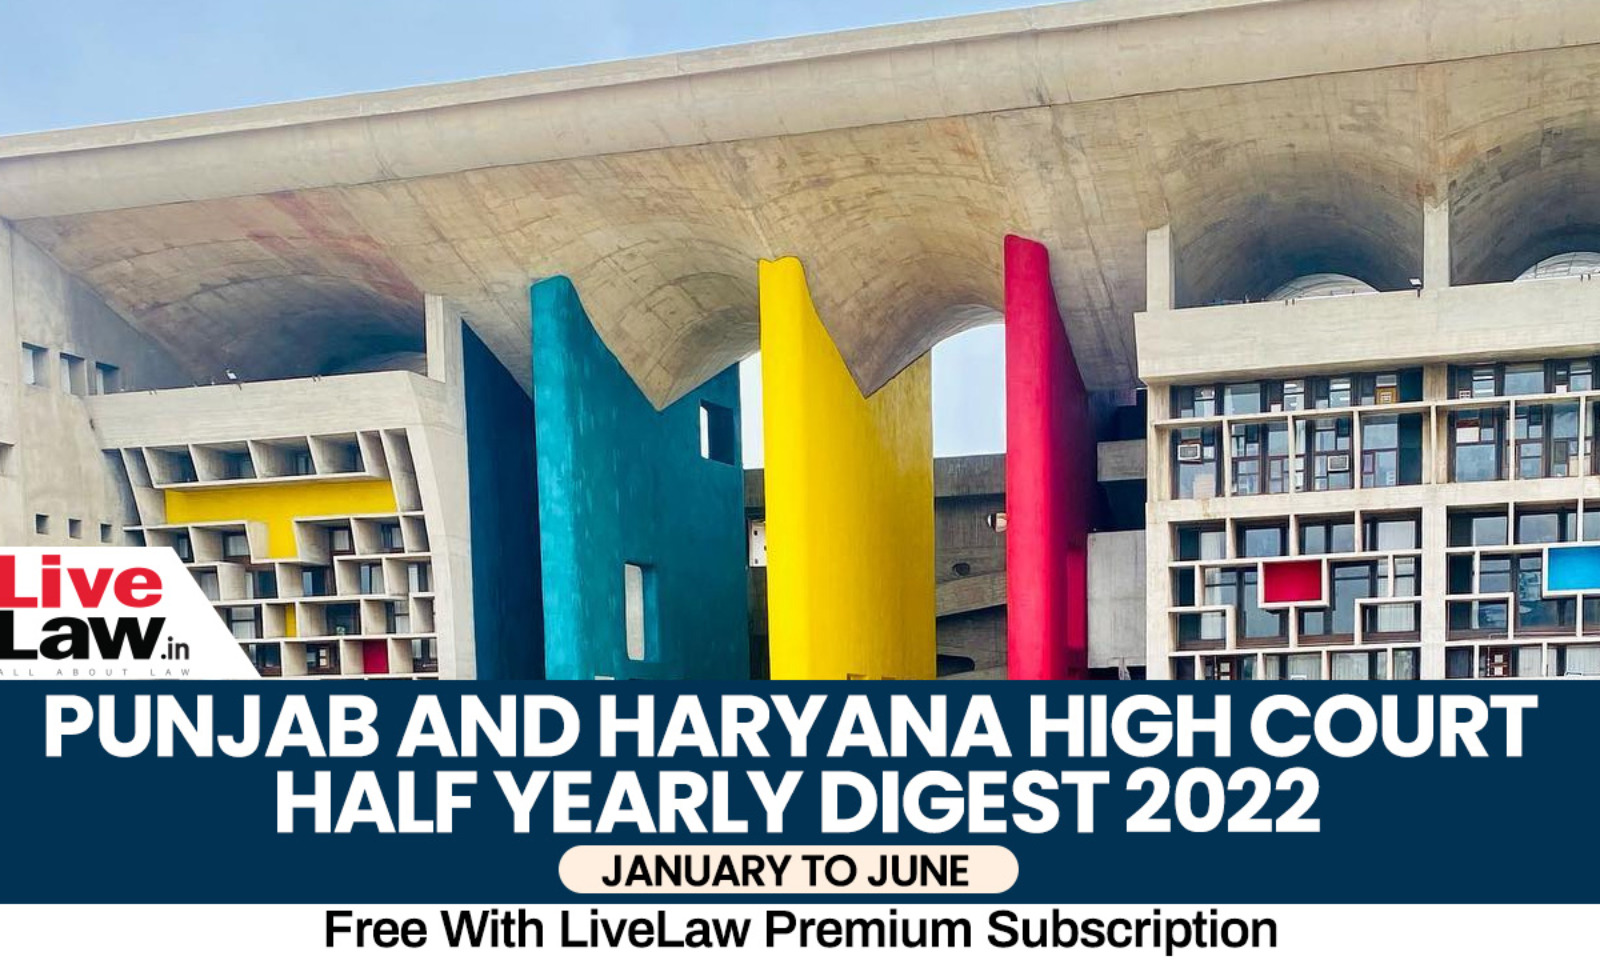 1600x960 428573 punjab and haryana high court half yearly digest january to june 2022